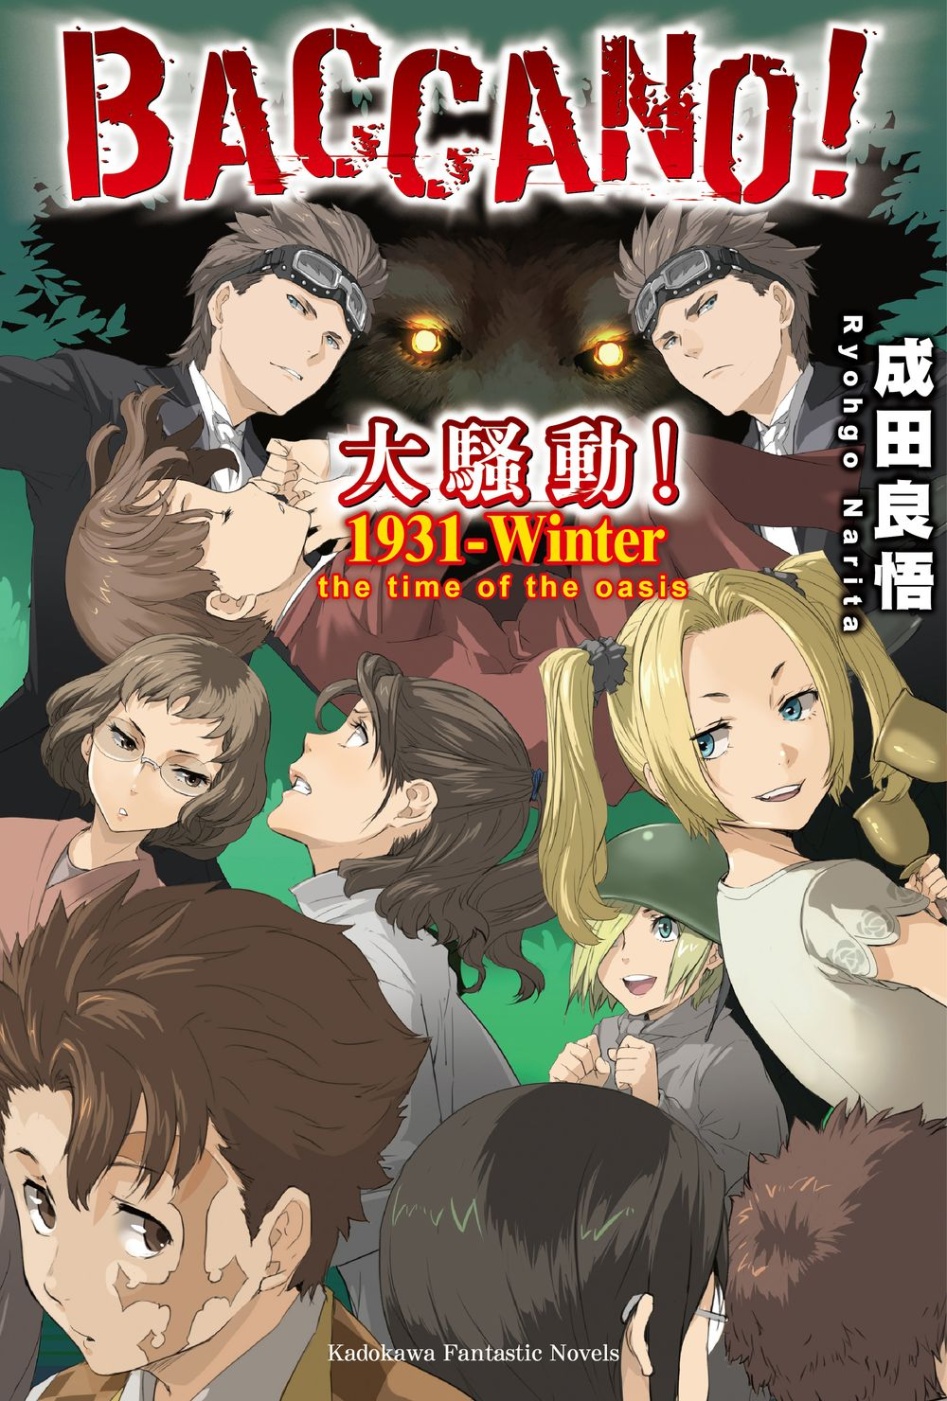 BACCANO!大騷動! (20) 1931-Winter the time of the oasis